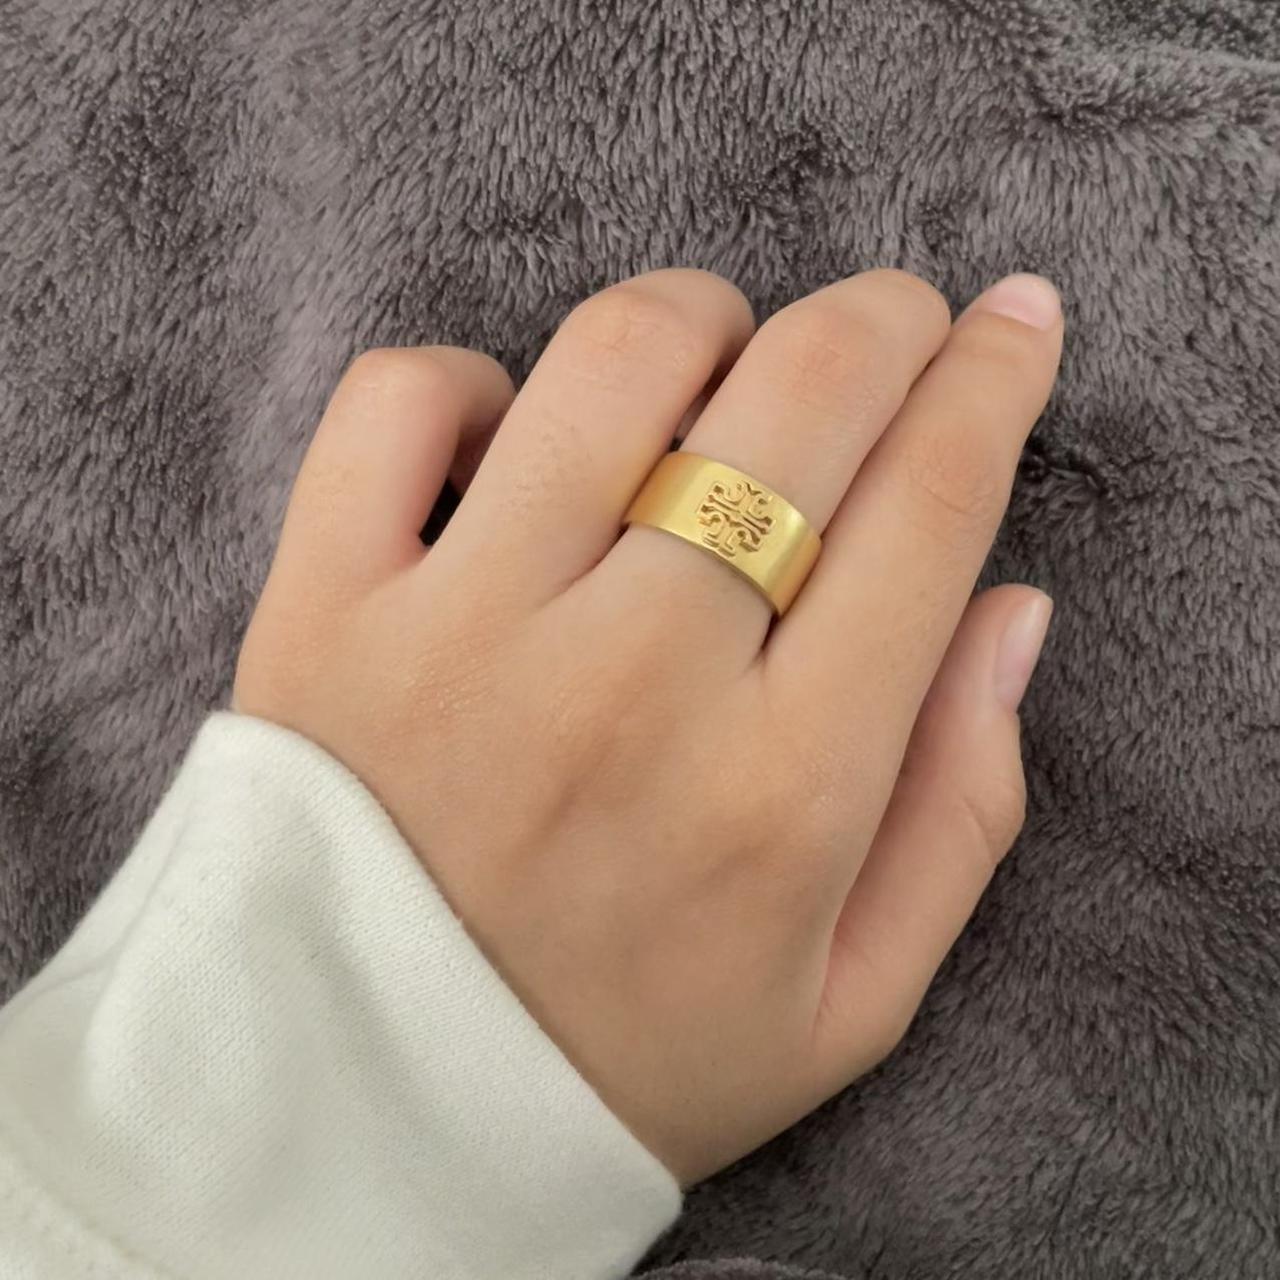 Authentic TORY BURCH GOLD RING, size 7 PERFECT... - Depop